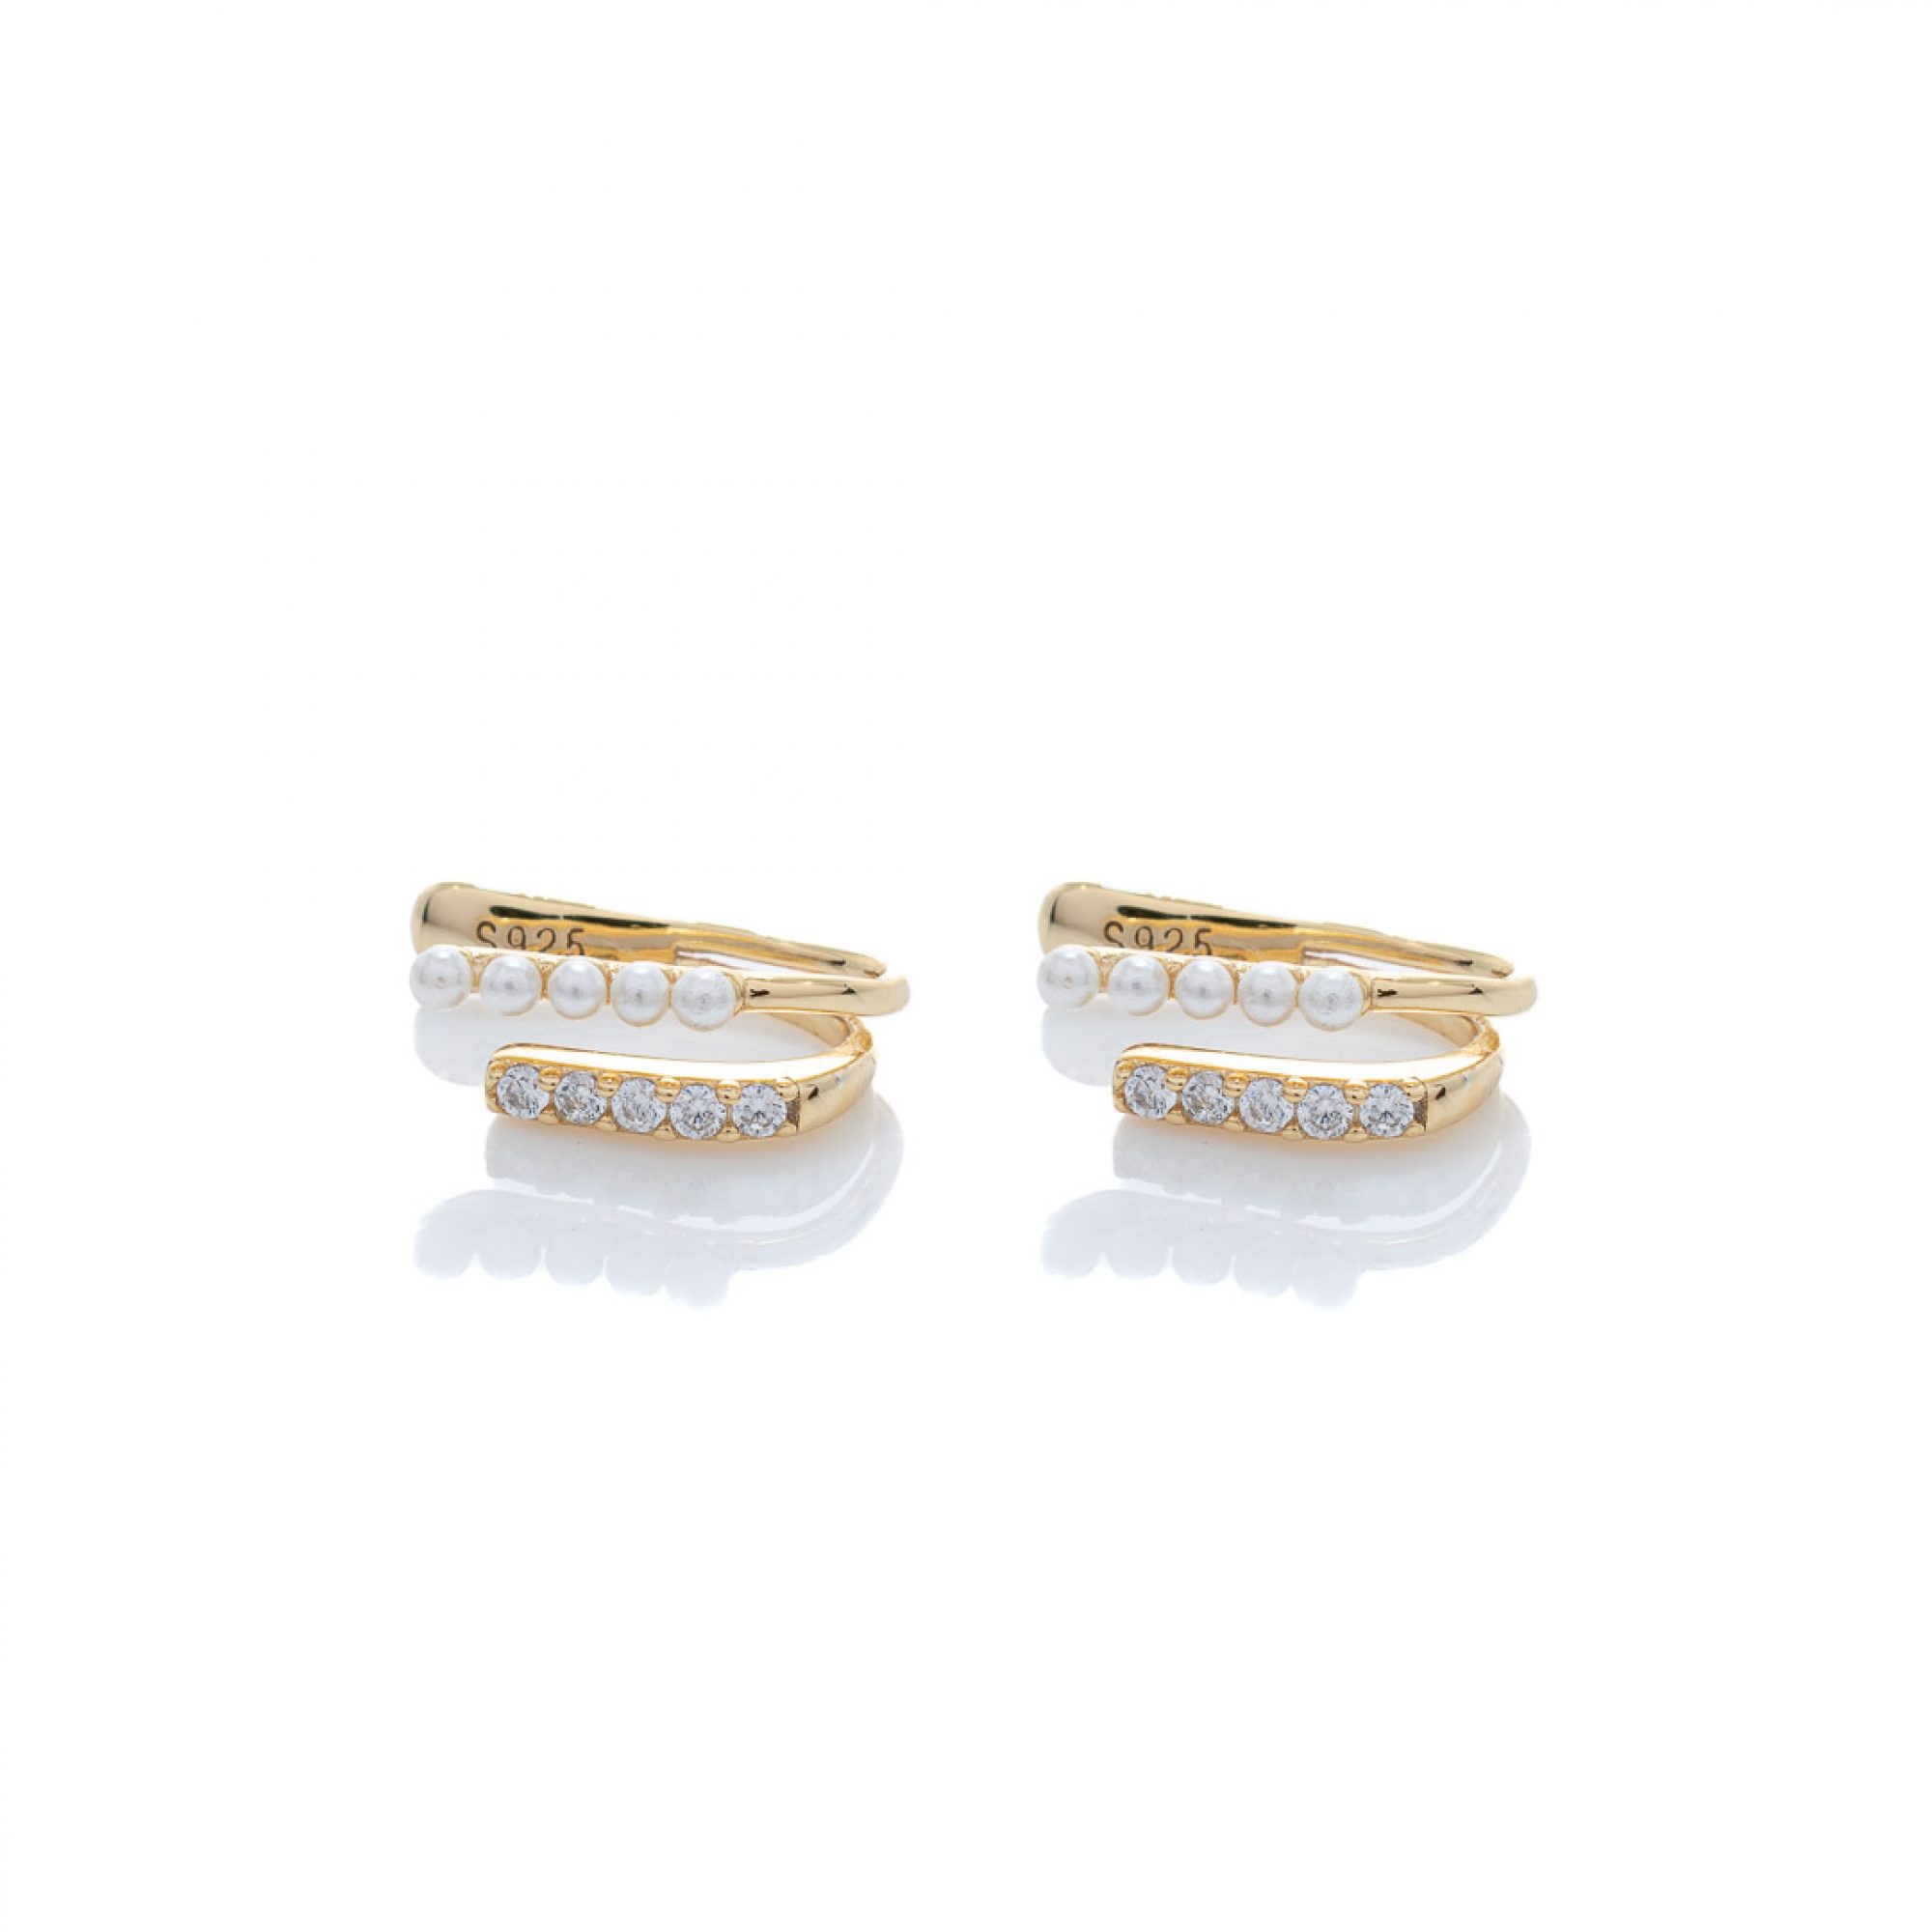 Gold plated ear cuffs with real pearls and zircon stones